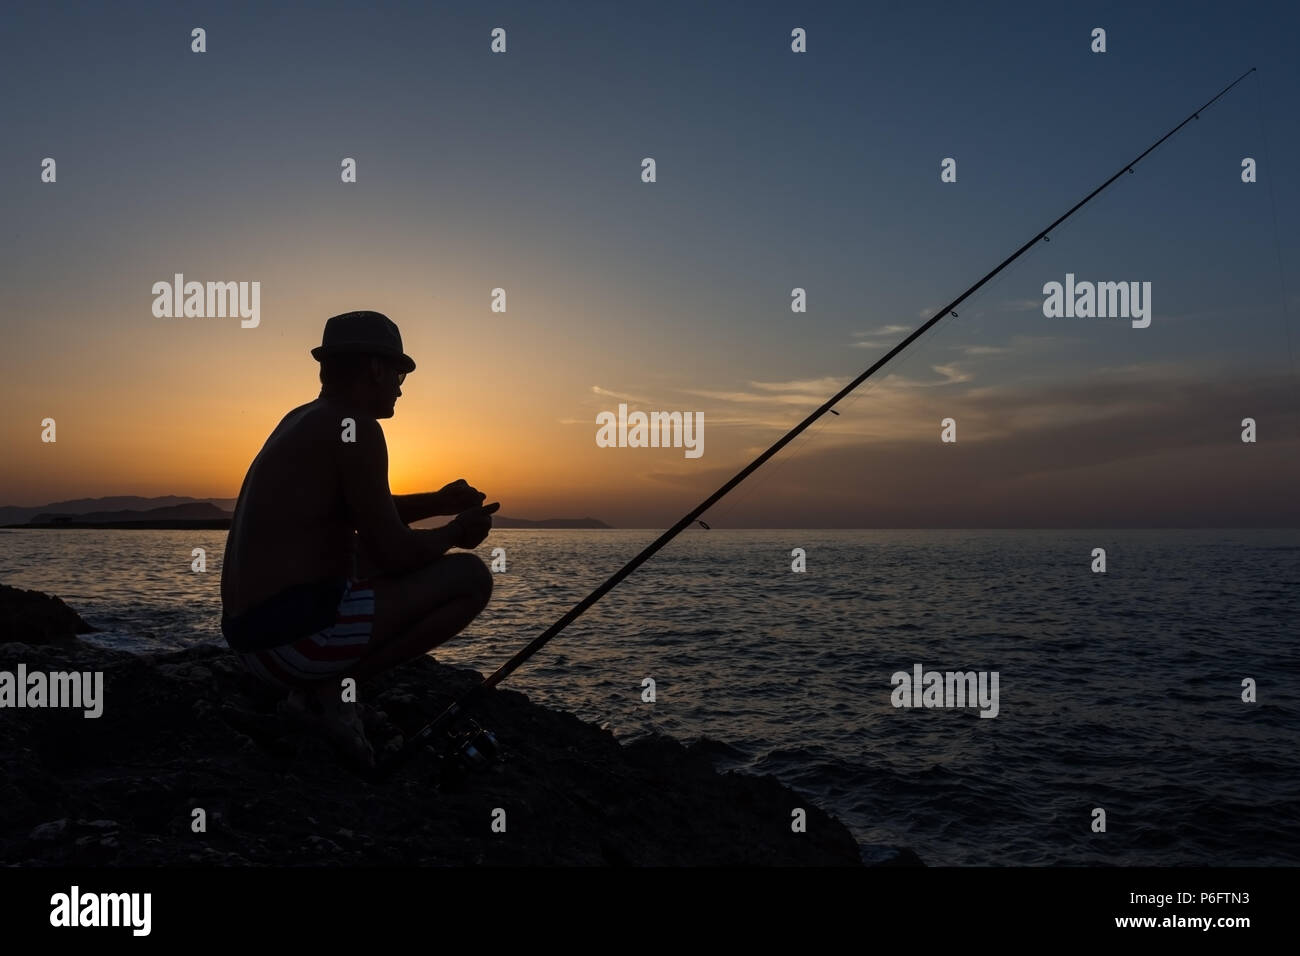 An adult man fishing on the rocks at sunset on the island of Crete in Greece Stock Photo